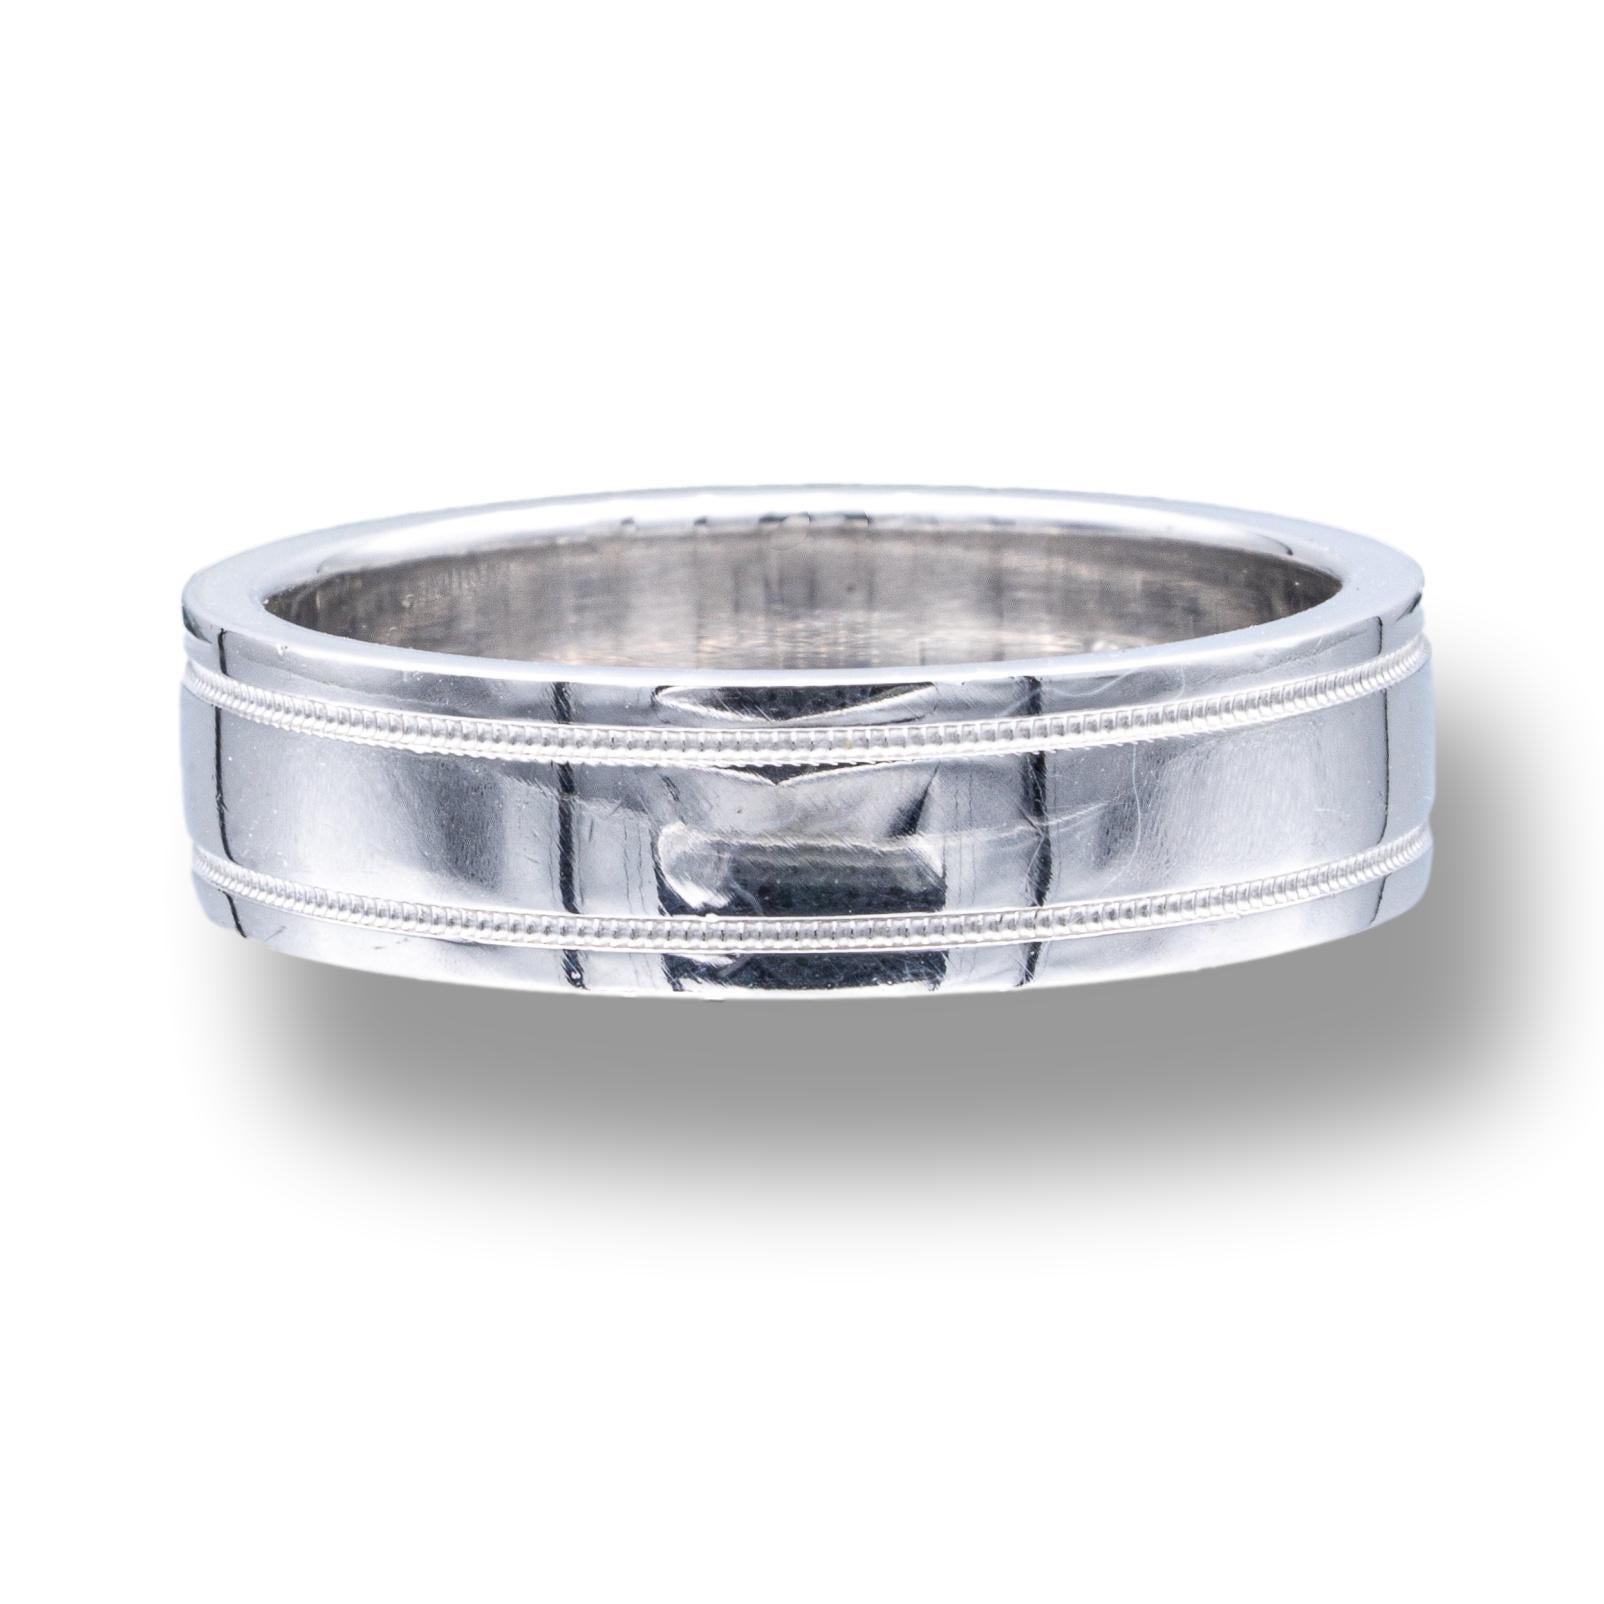 Tiffany & Co. men's wedding band finely crafted in platinum with a double mil-grain design. This band is a flat comfort fit.

Brand: Tiffany & Co.
Hallmarks: Tiffany & Co. PT950
Finger Size: 11
Width: 6mm
Weight: 16.9 grams
Retail: $2,800

Comes in